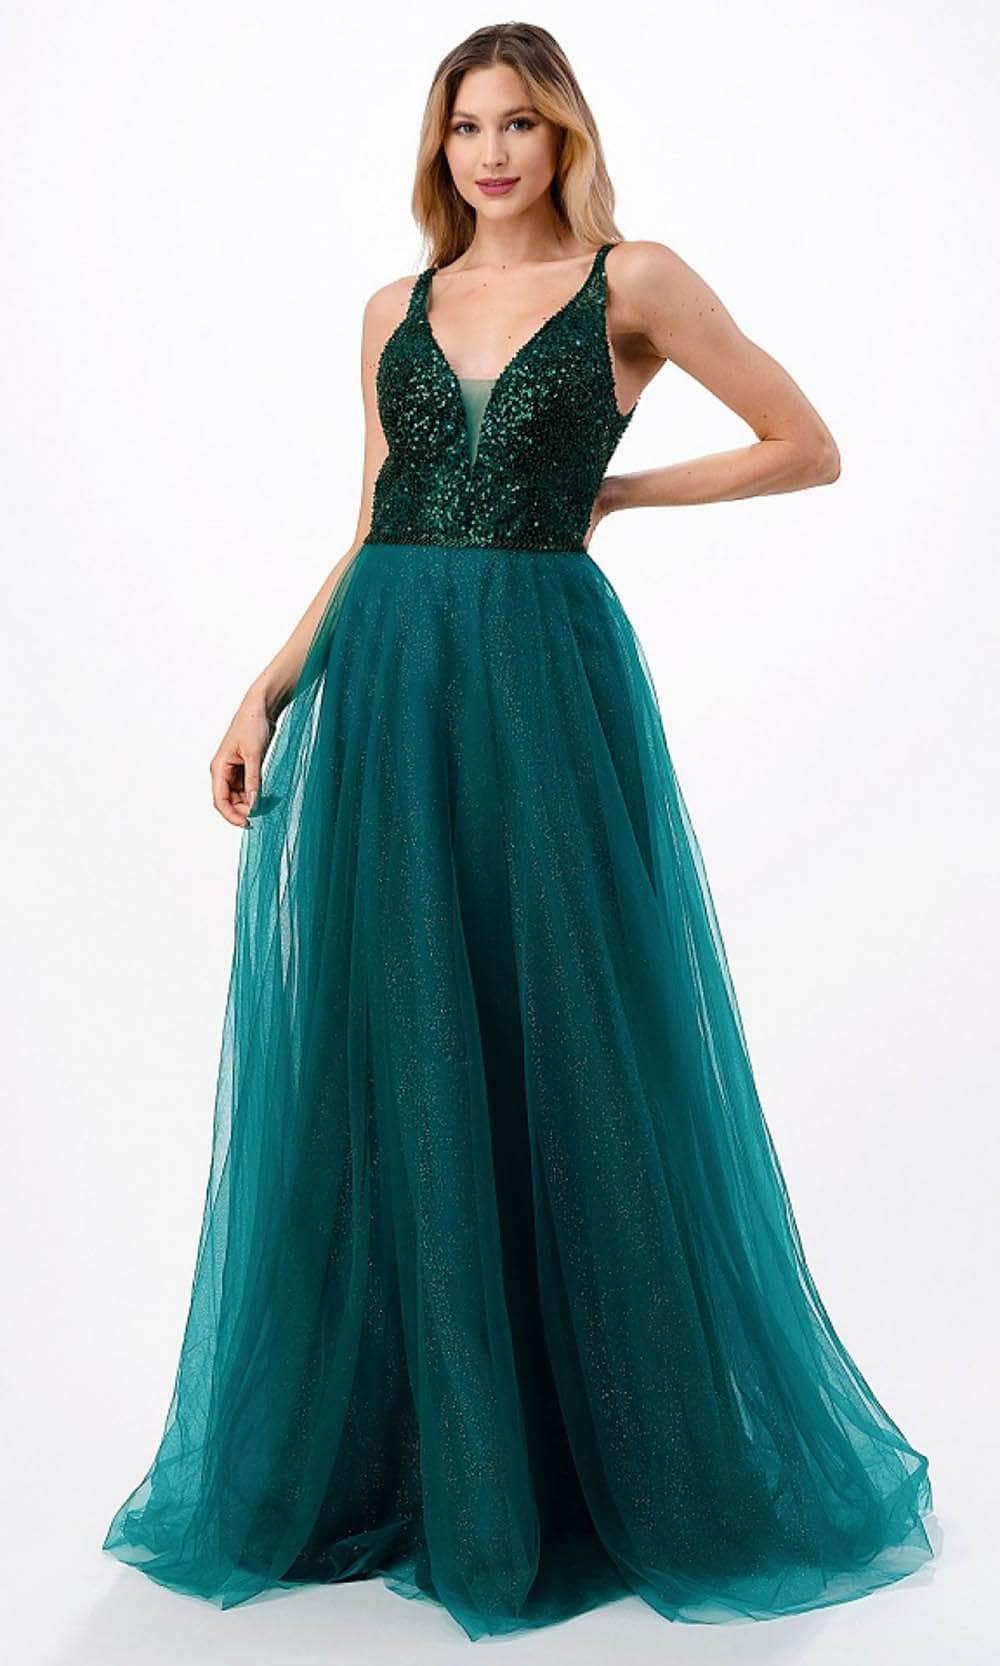 Image of Aspeed Design L2684 - Bead Embellished Open Back Evening Gown